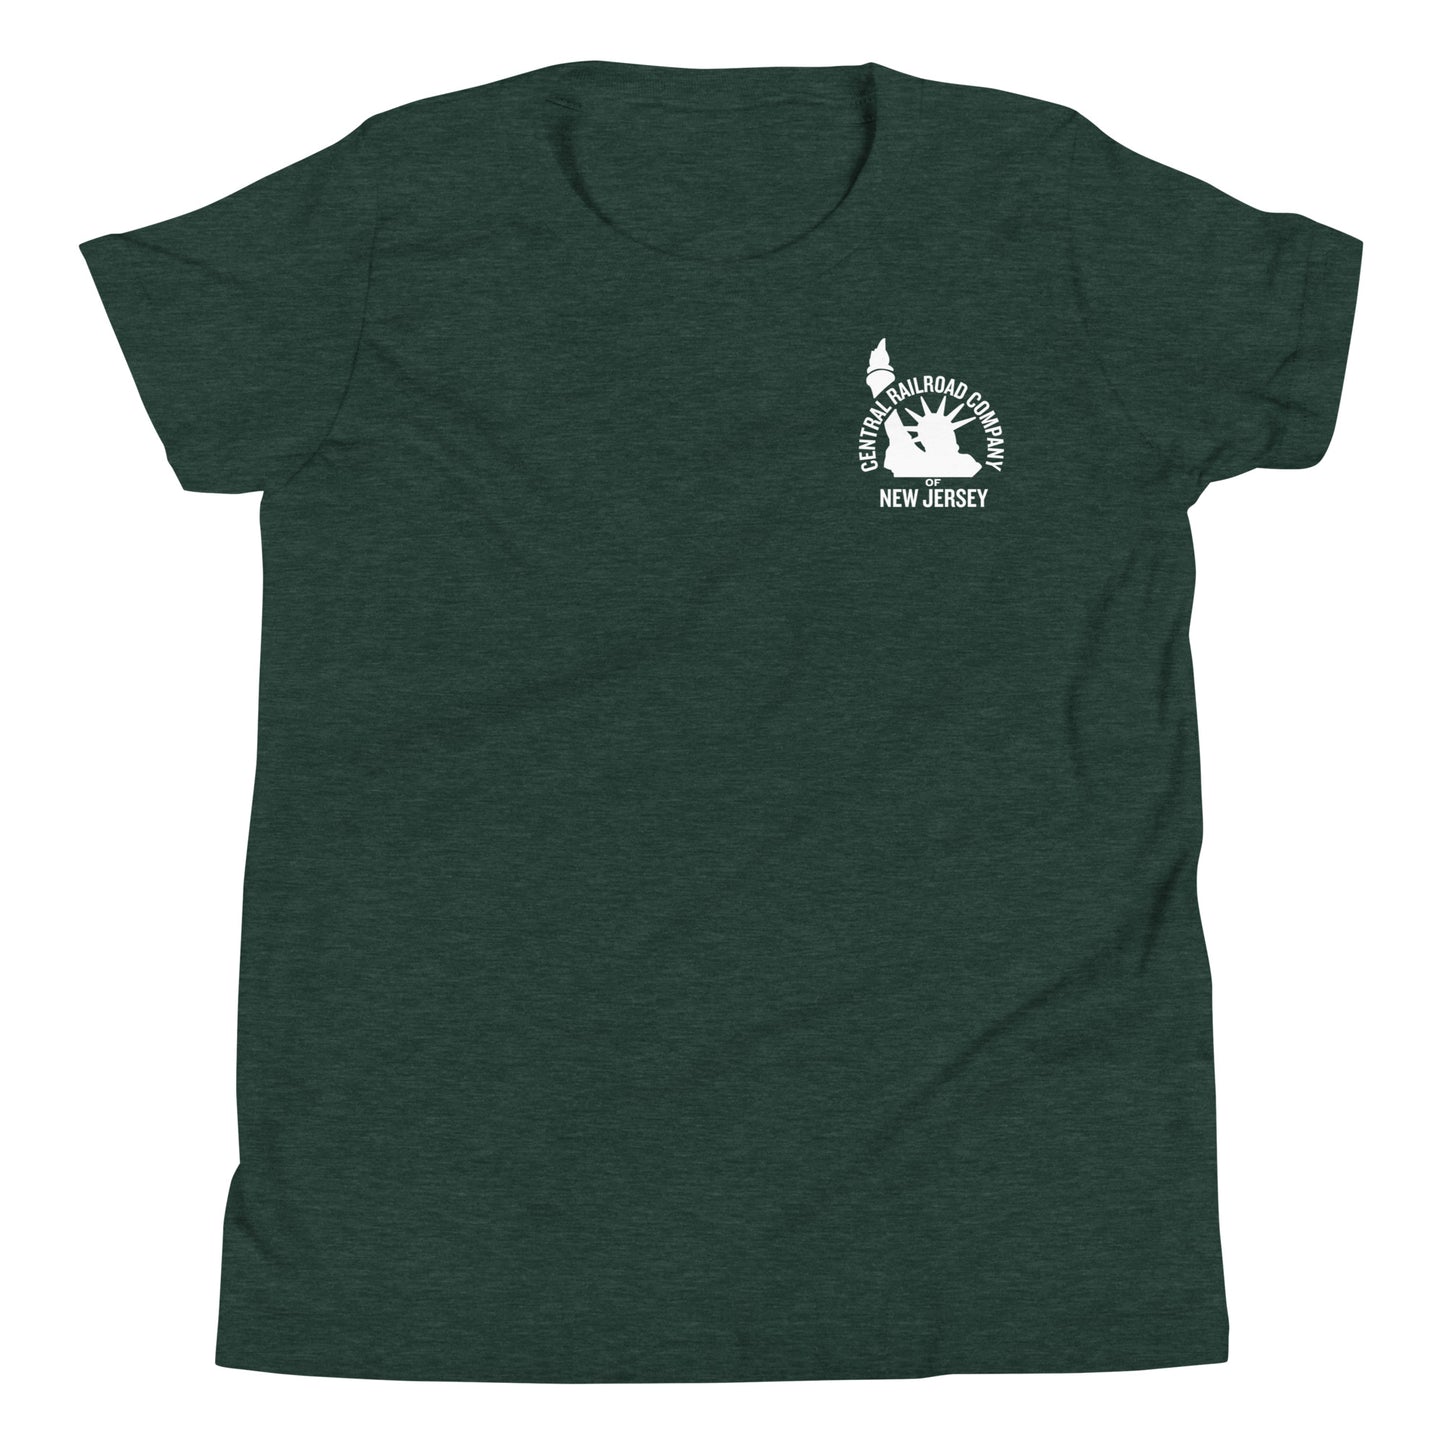 Kid's Central Railroad Company of New Jersey tee